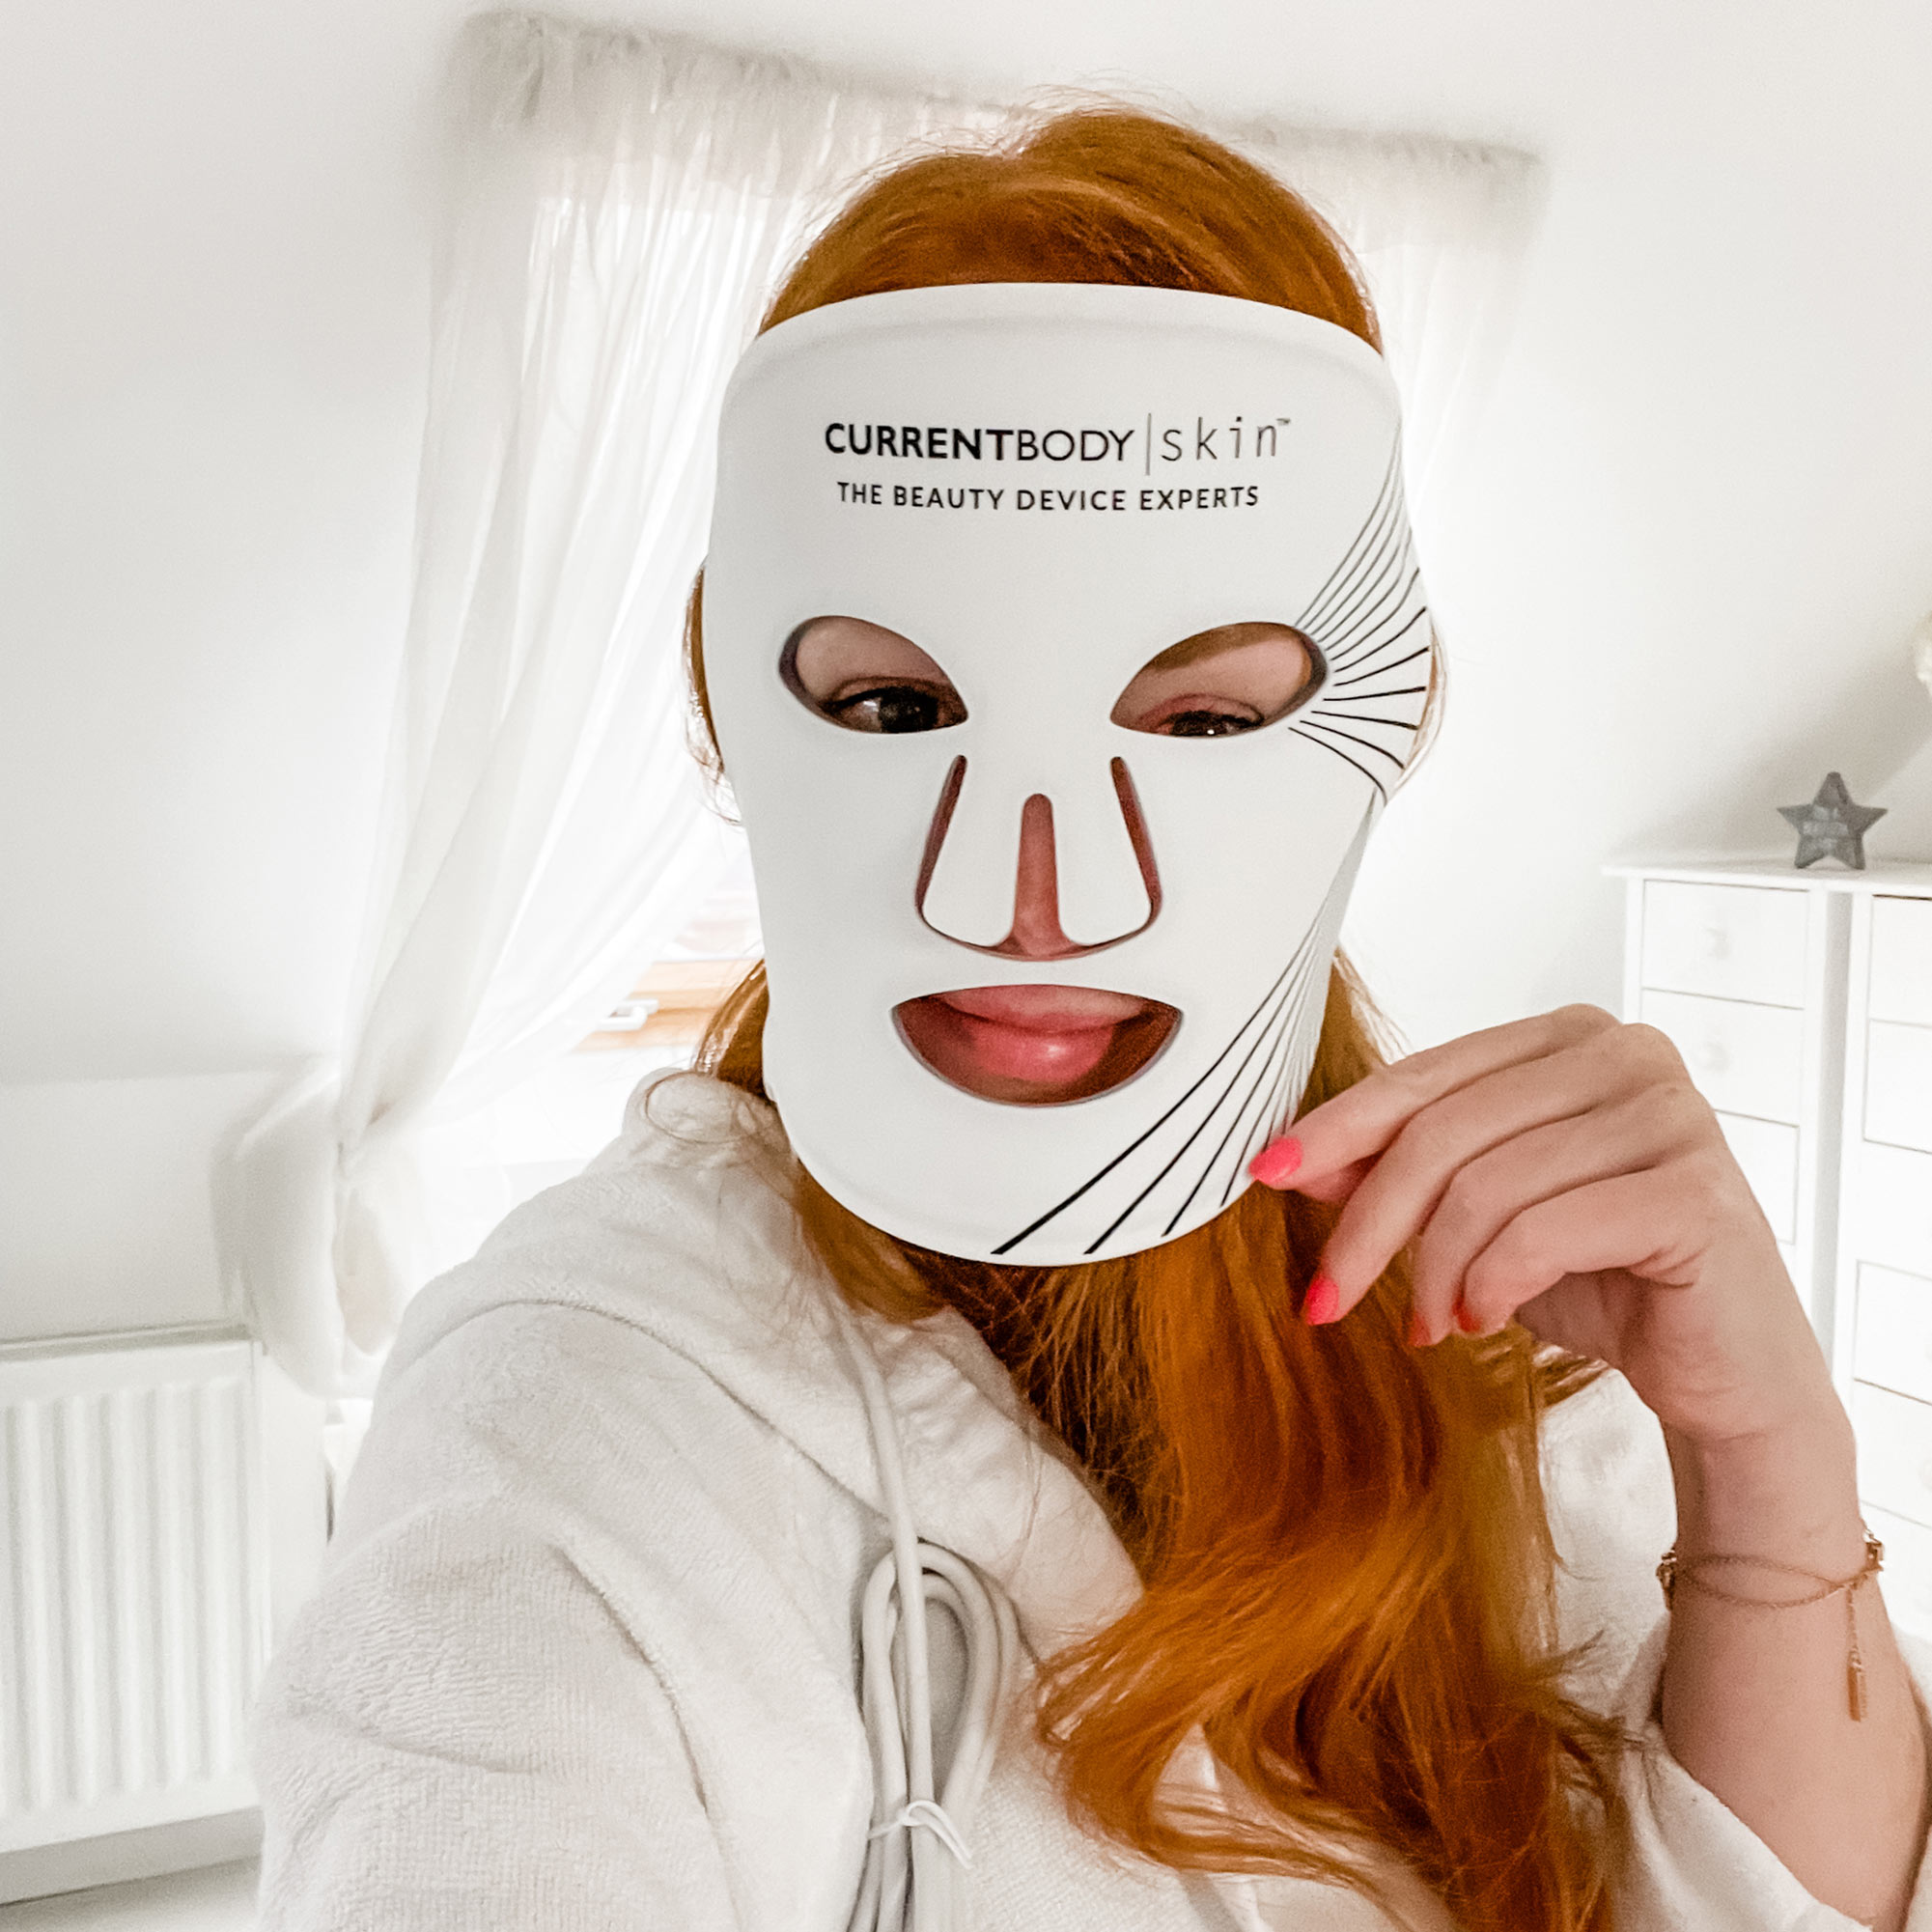 LED face mask review